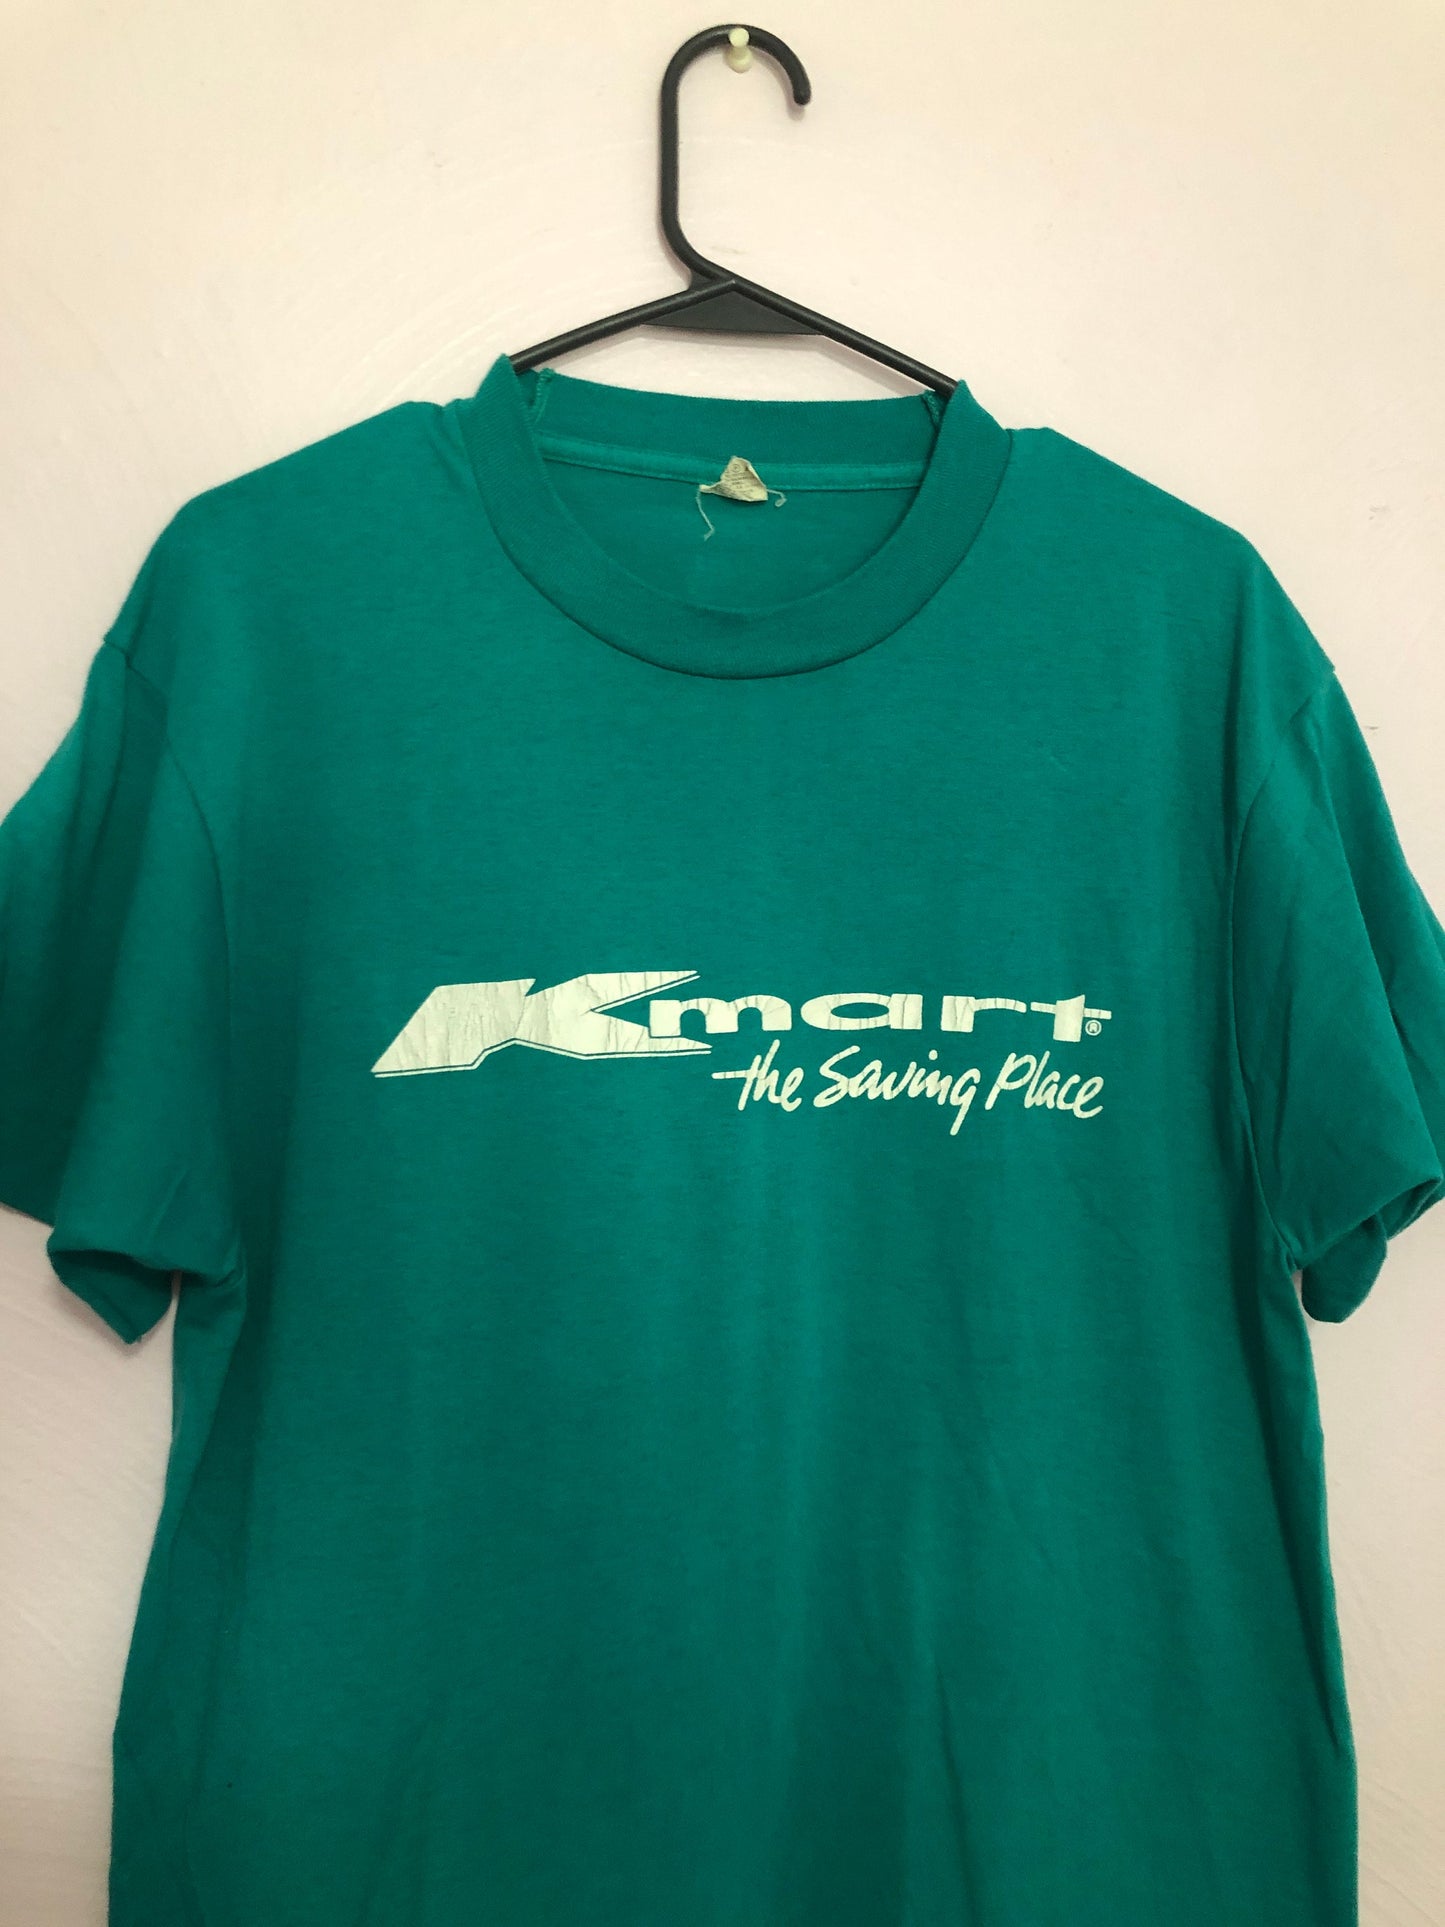 Vintage KMART “The Saving Place” Screen Stars Retro T Shirt Tee Screen Stars Made USA Size L Department Store Mart 1980s 80s Single Stitch